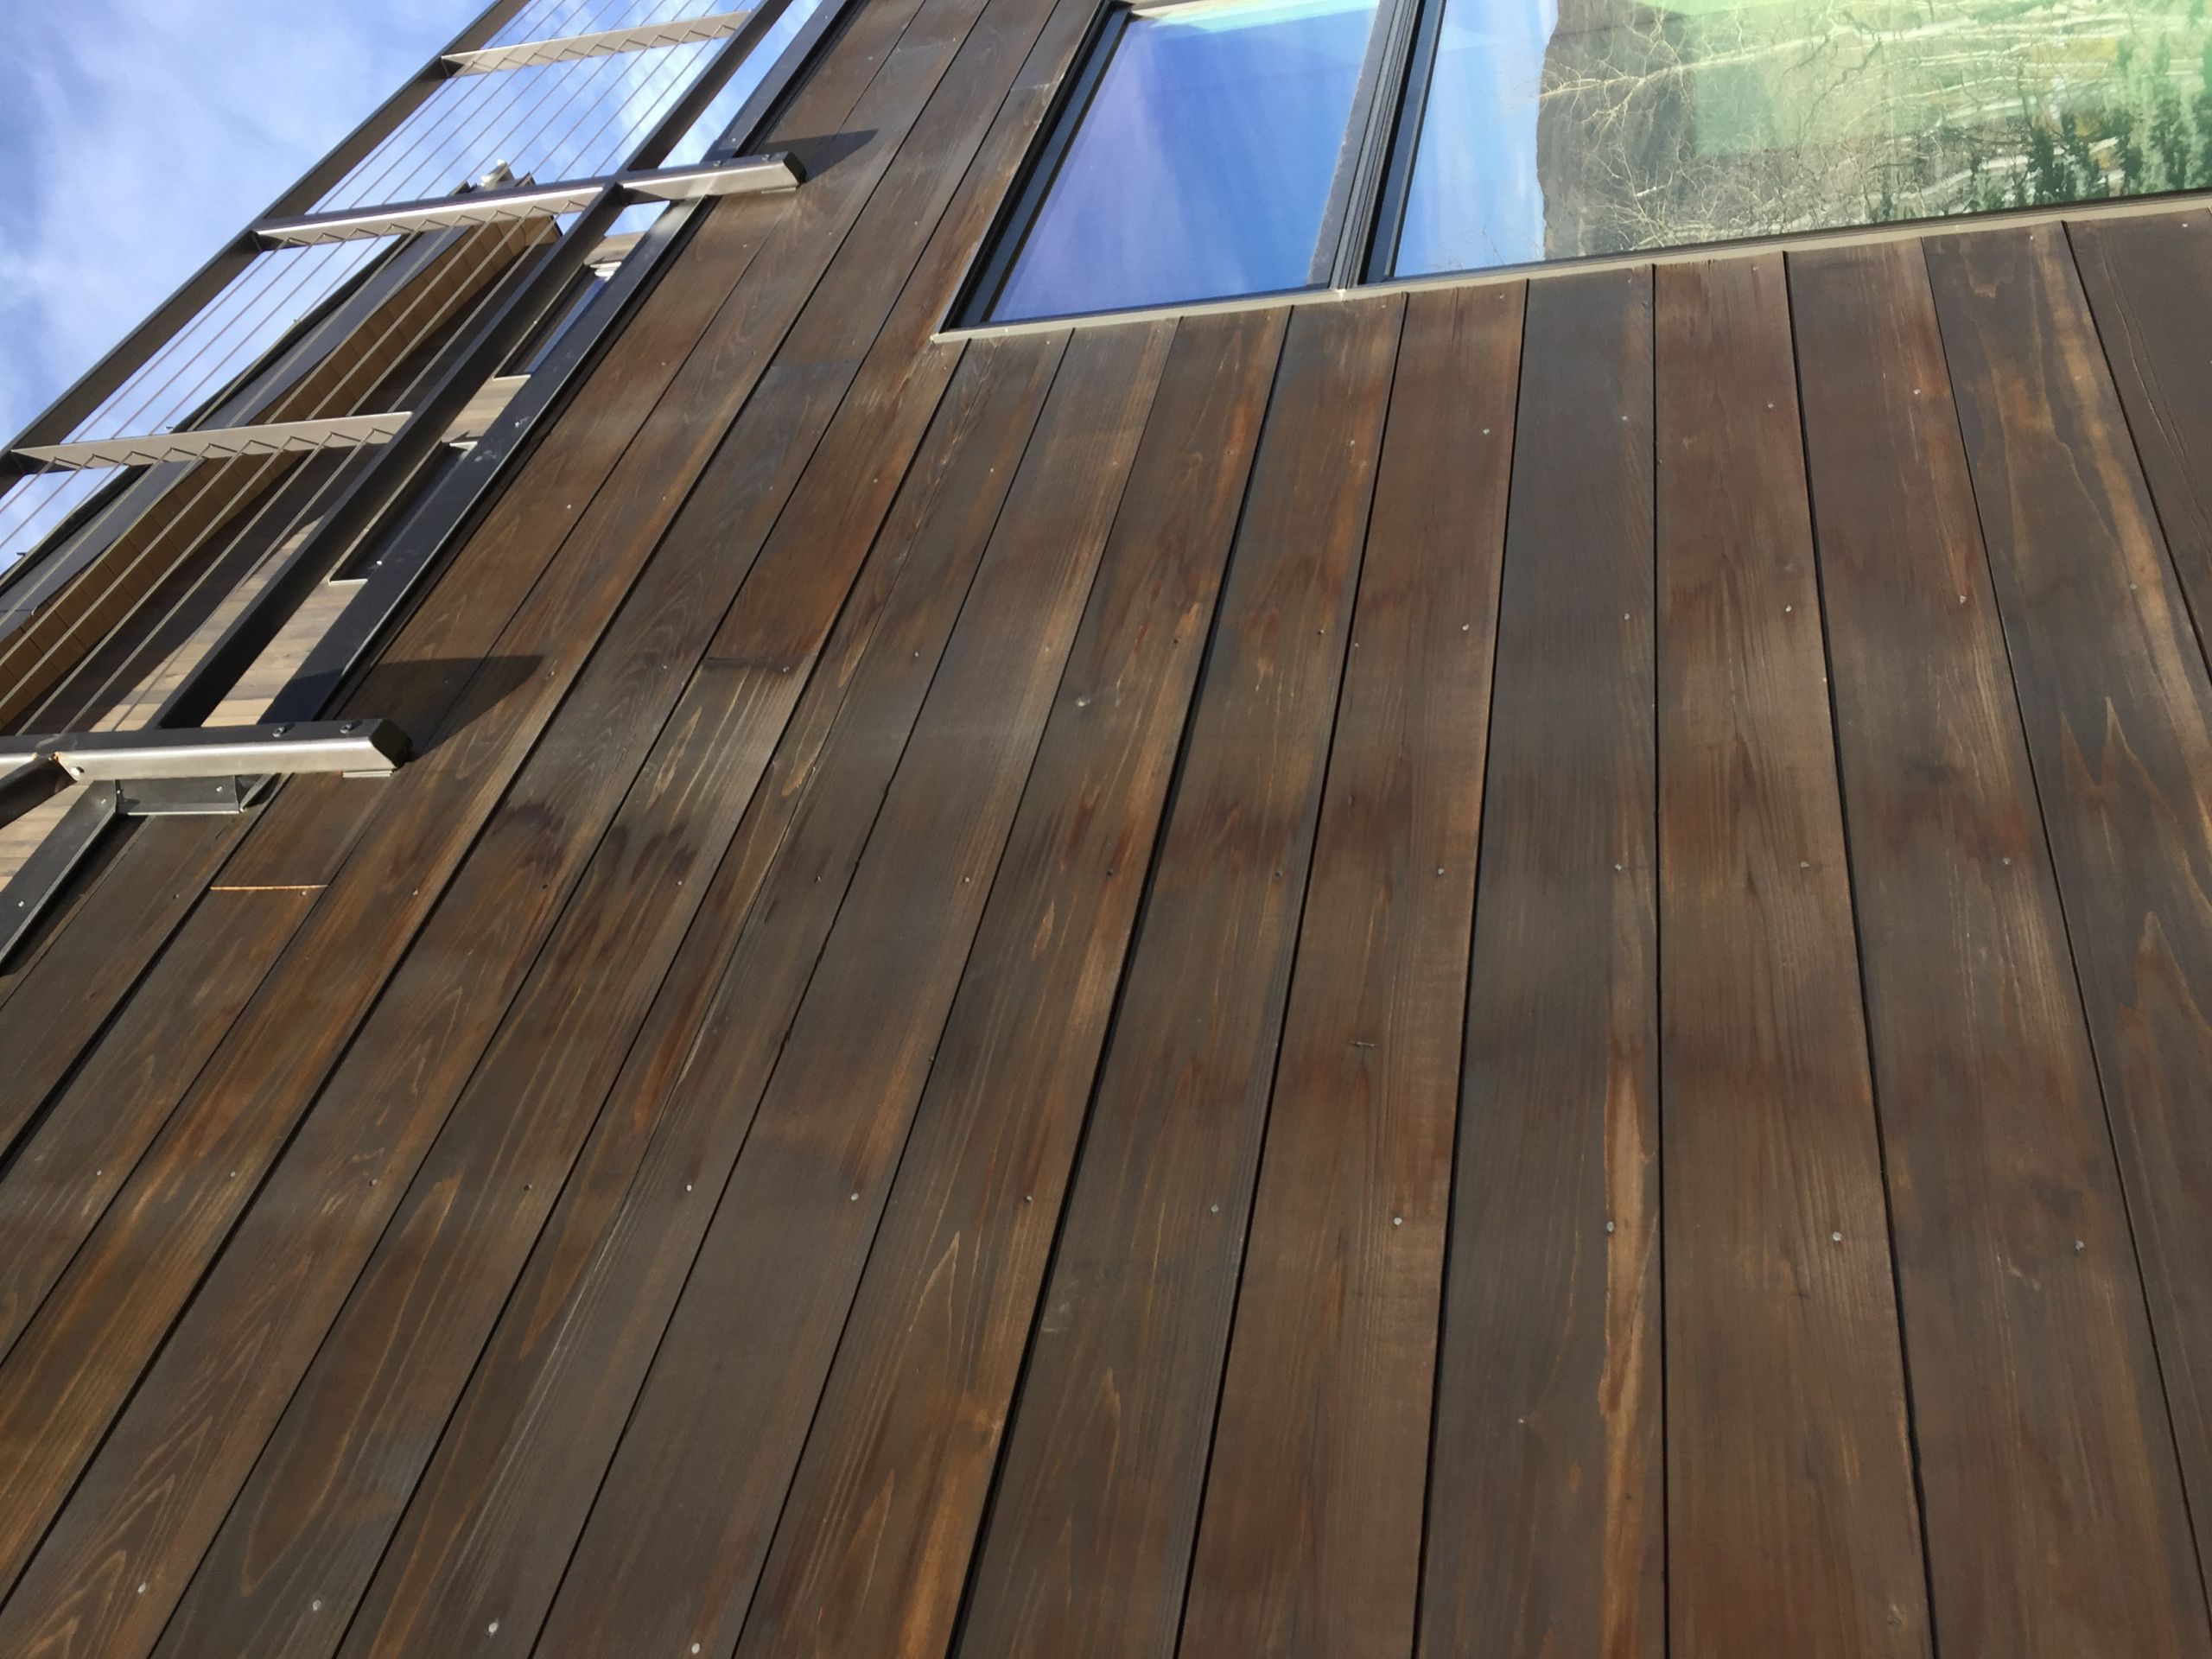 Sherwin Williams Deck Paint Reviews
 Sherwin Williams Super Deck Stain Review 2019